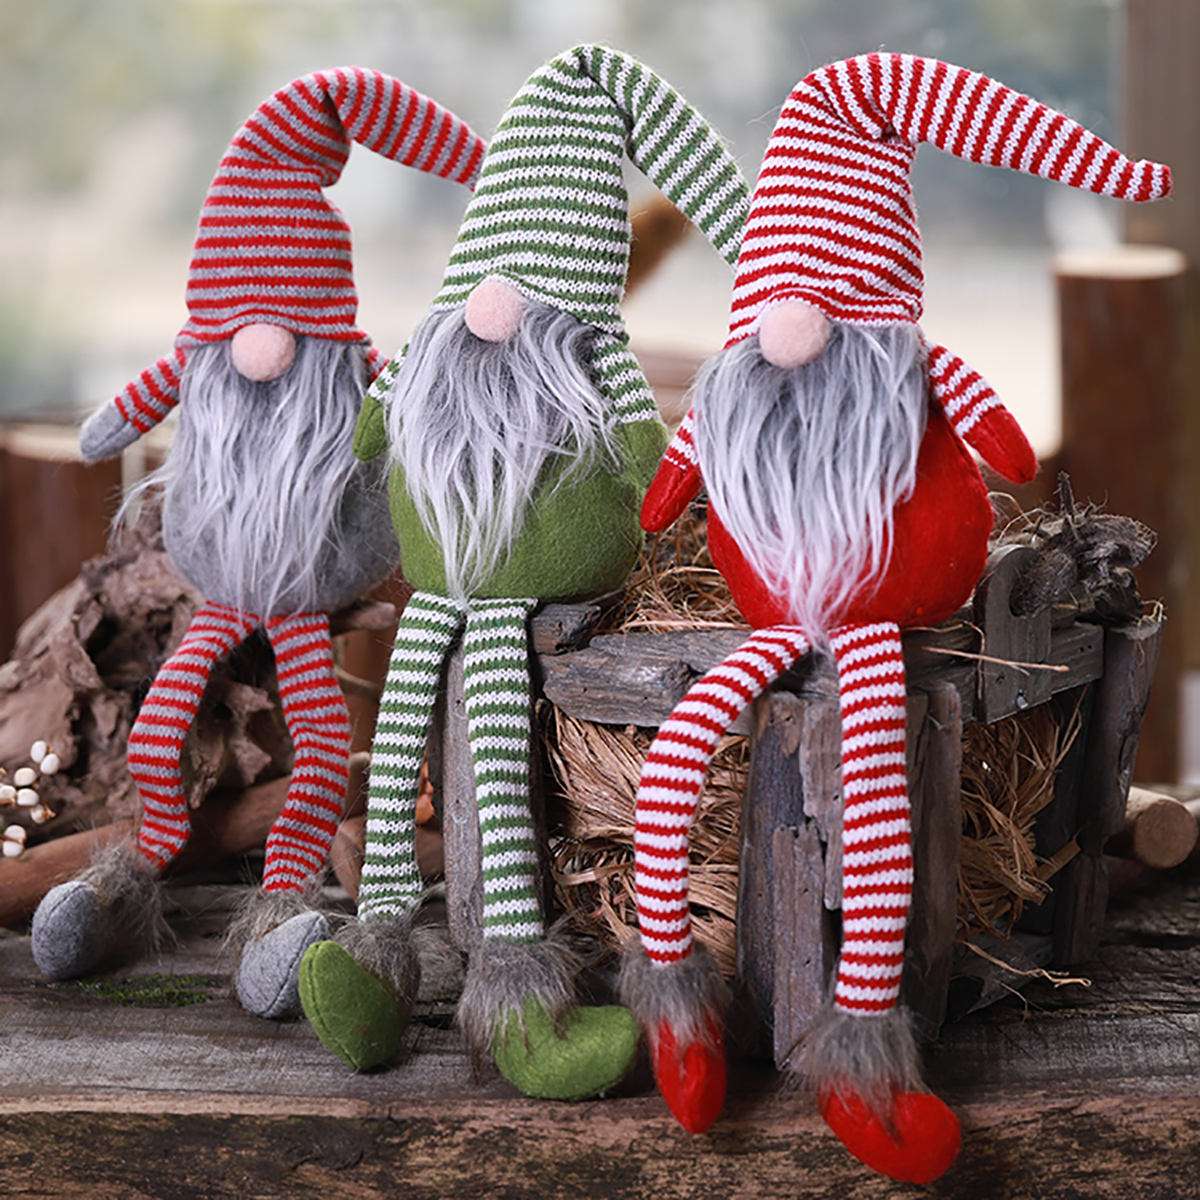 Non-Woven-Hat-With-Long-Legs-Handmade-Gnome-Santa-Christmas-Figurines-Ornament-Decorations-Toys-1636850-1